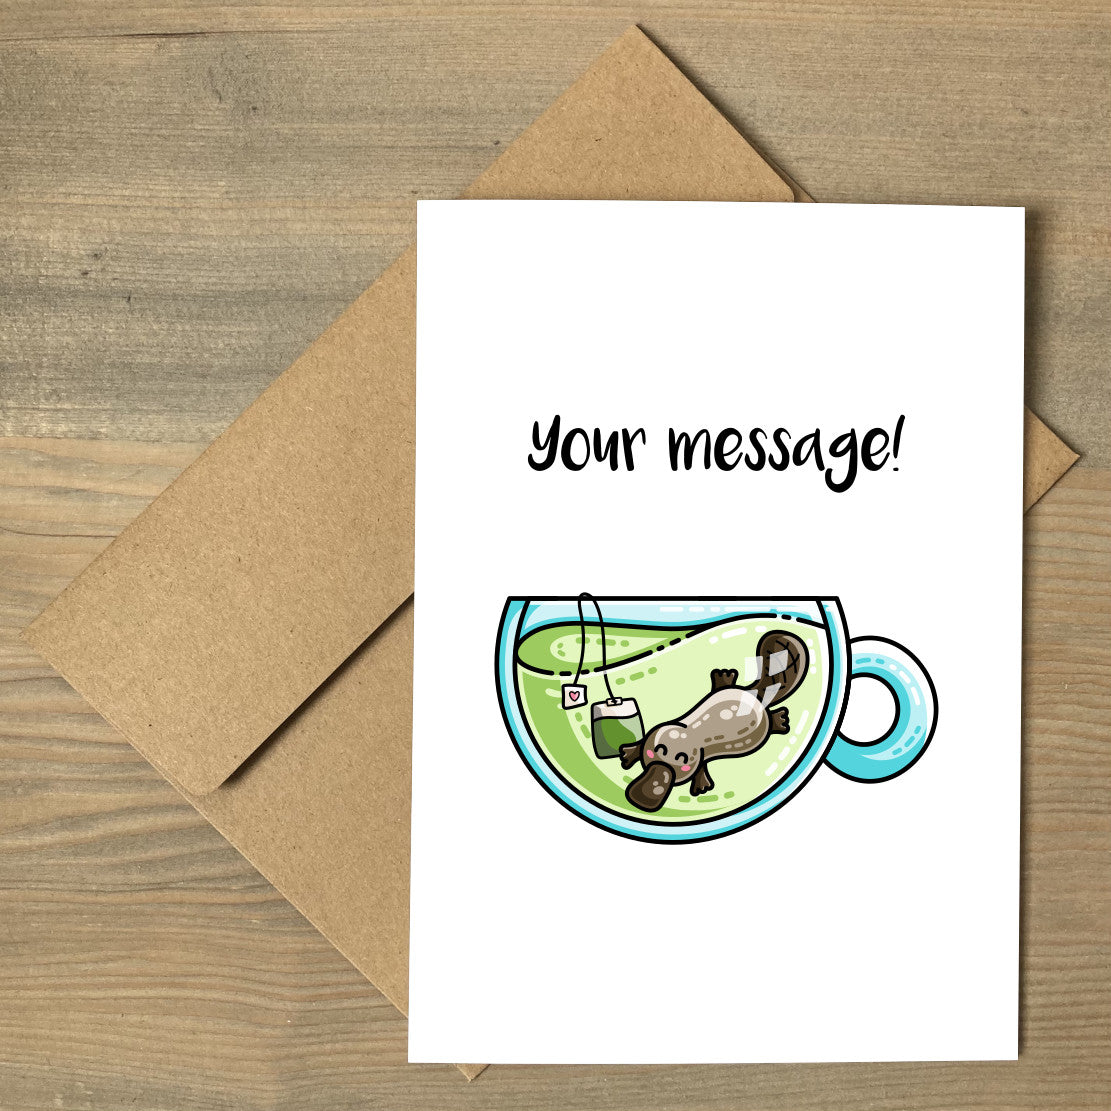 A white greeting card lying flat on a brown envelope, with a design of a cute platypus swimming in a glass teacup of green tea with personalised wording above